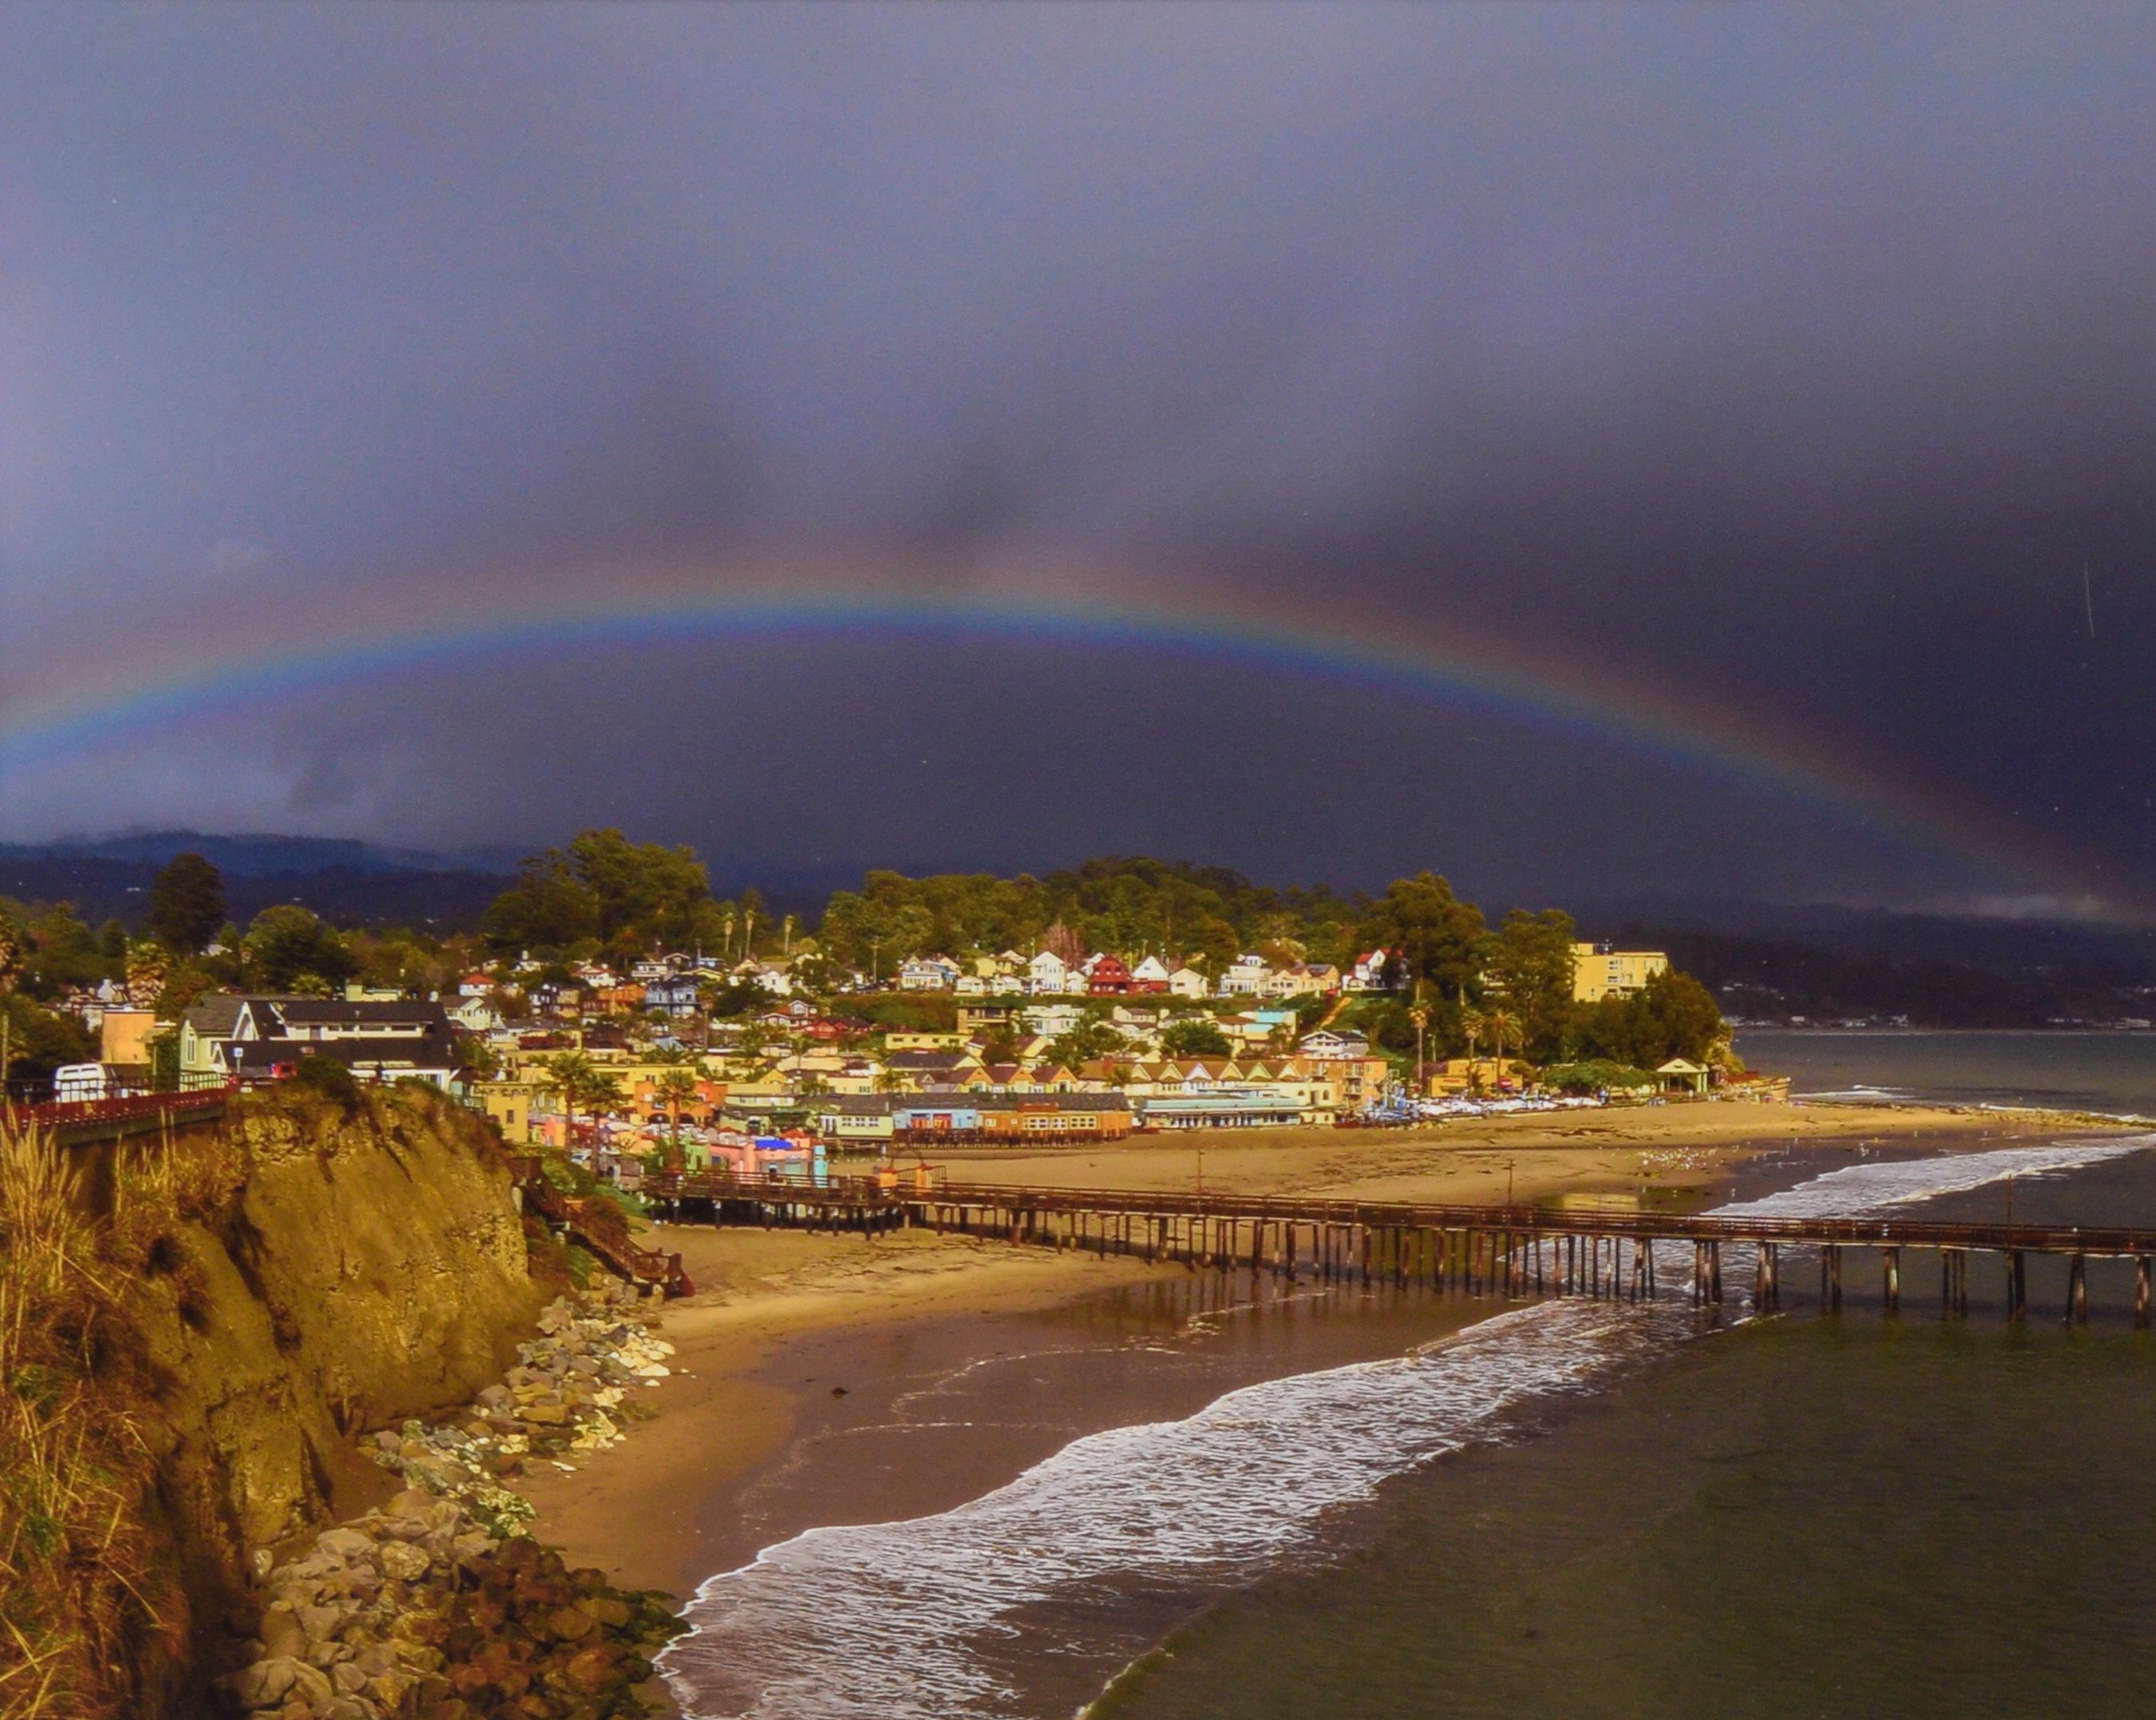 Rainbow Over Capitola Village, Santa Cruz - Colored Photograph

Color photograph of a rainbow shining over Capitola Village in Santa Cruz, California by John F. Hunter (American, 20th C). The viewer looks out onto Capitola beach where the pier is